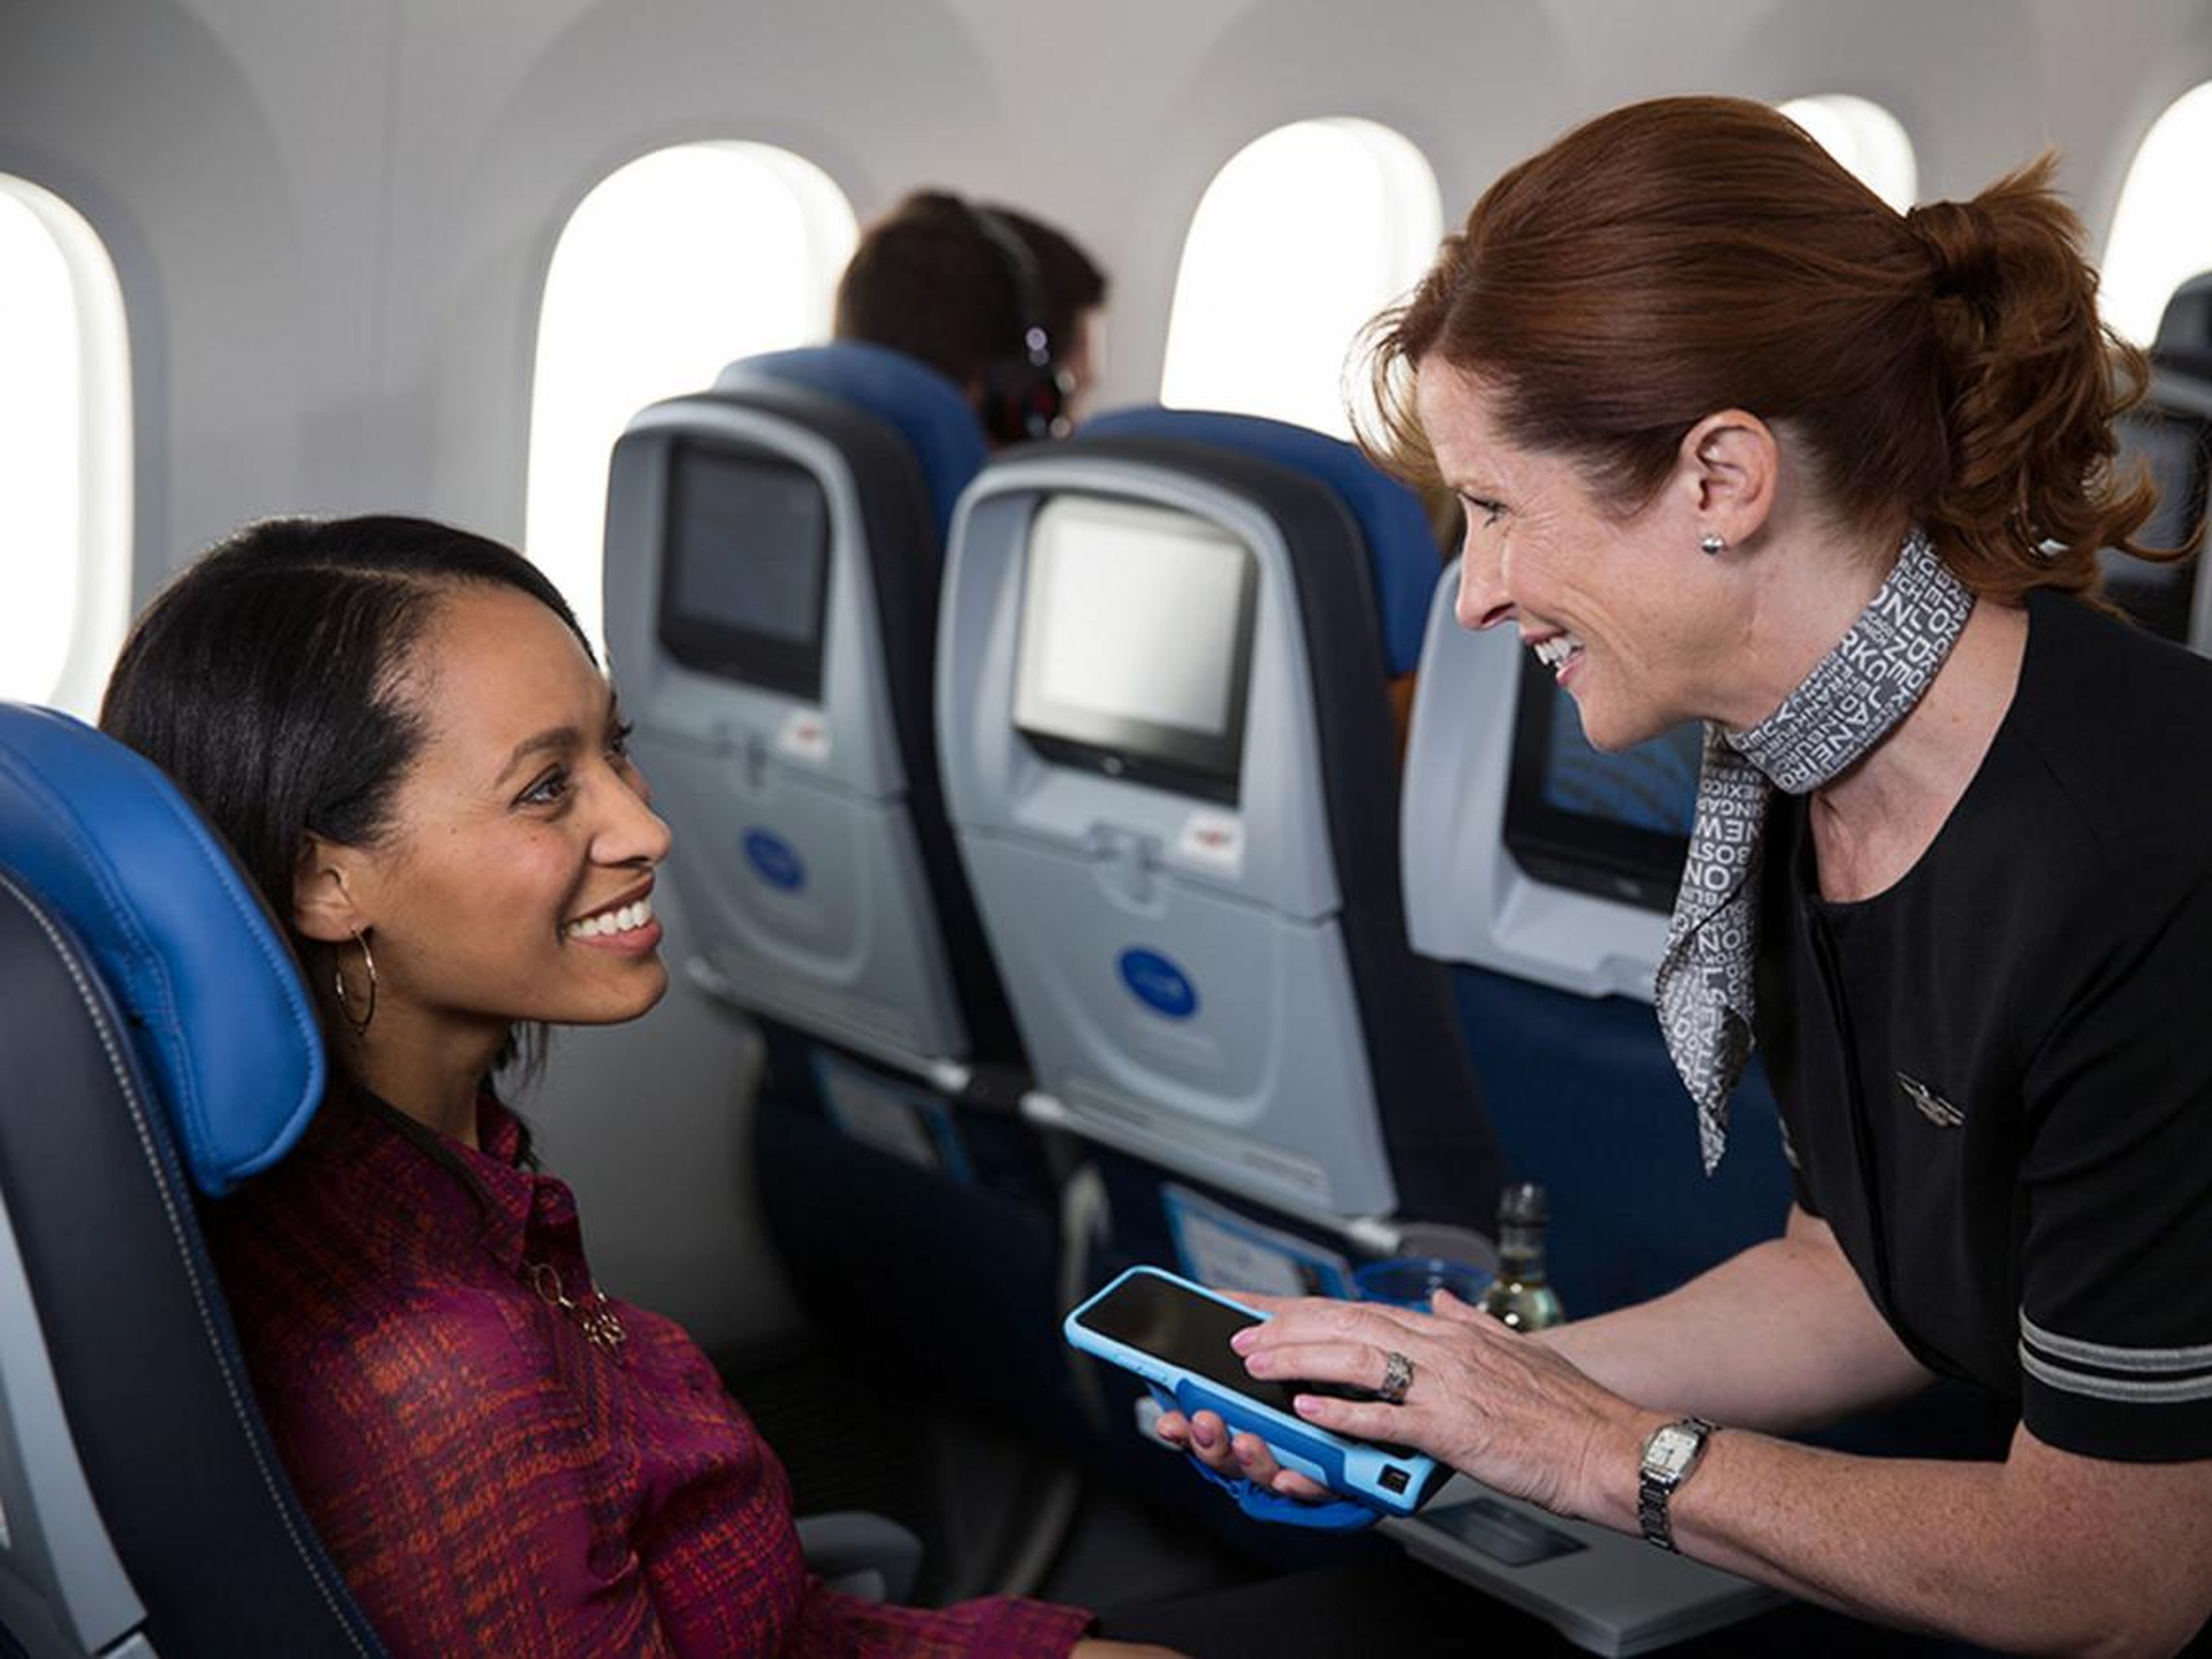 Flights attendants are also armed with new tech like smartphones that can provide valuable connection information for travelers.